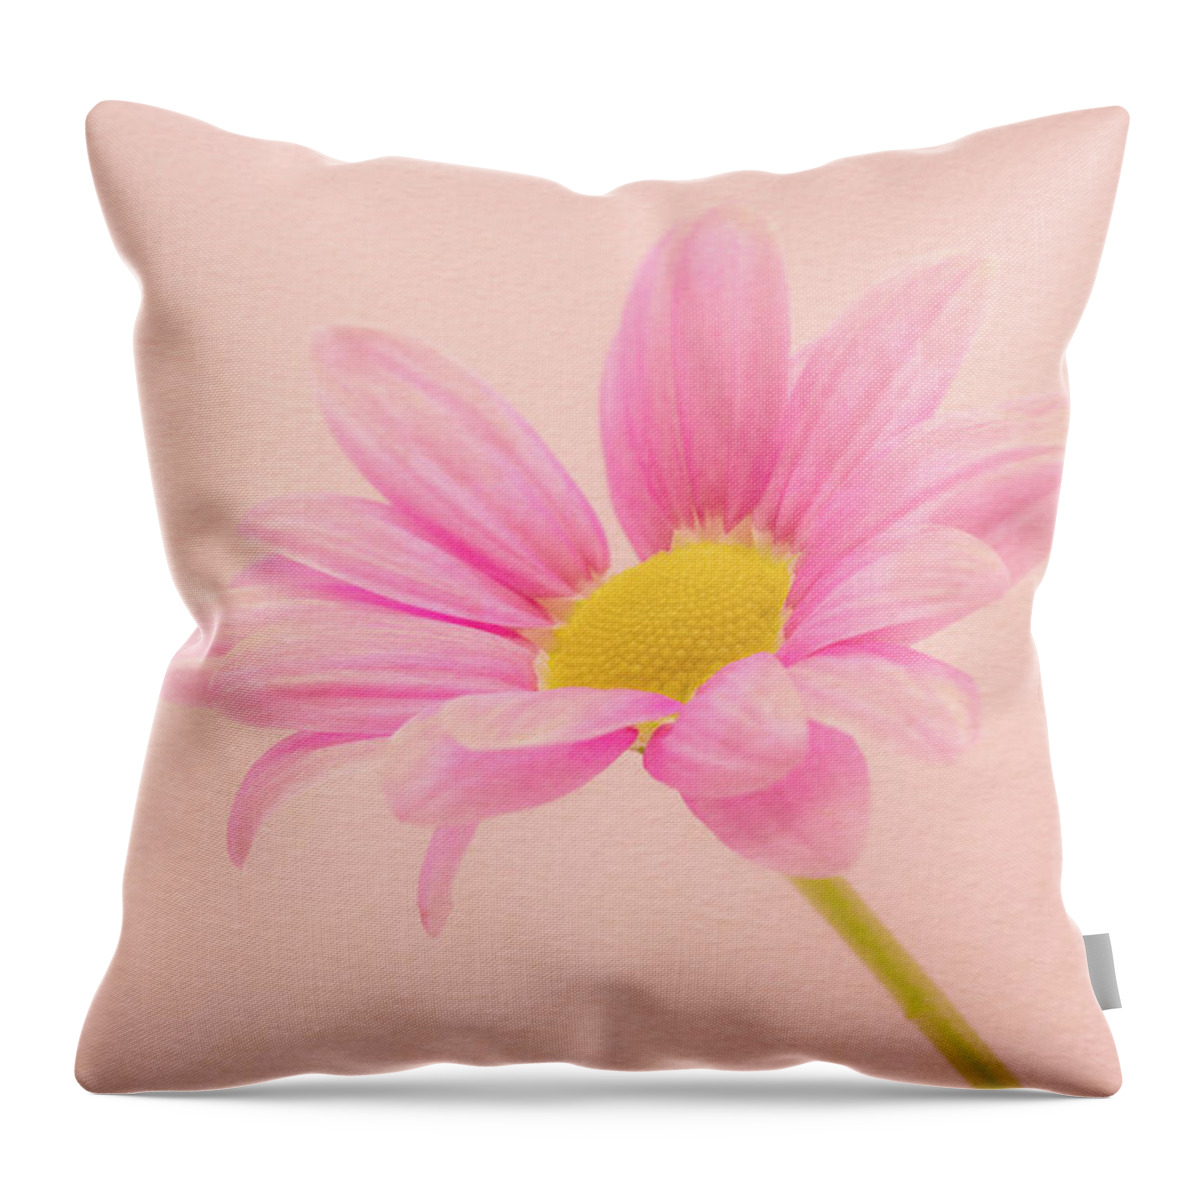 Flower Throw Pillow featuring the photograph Pink Chrysanthemum by Tanya C Smith